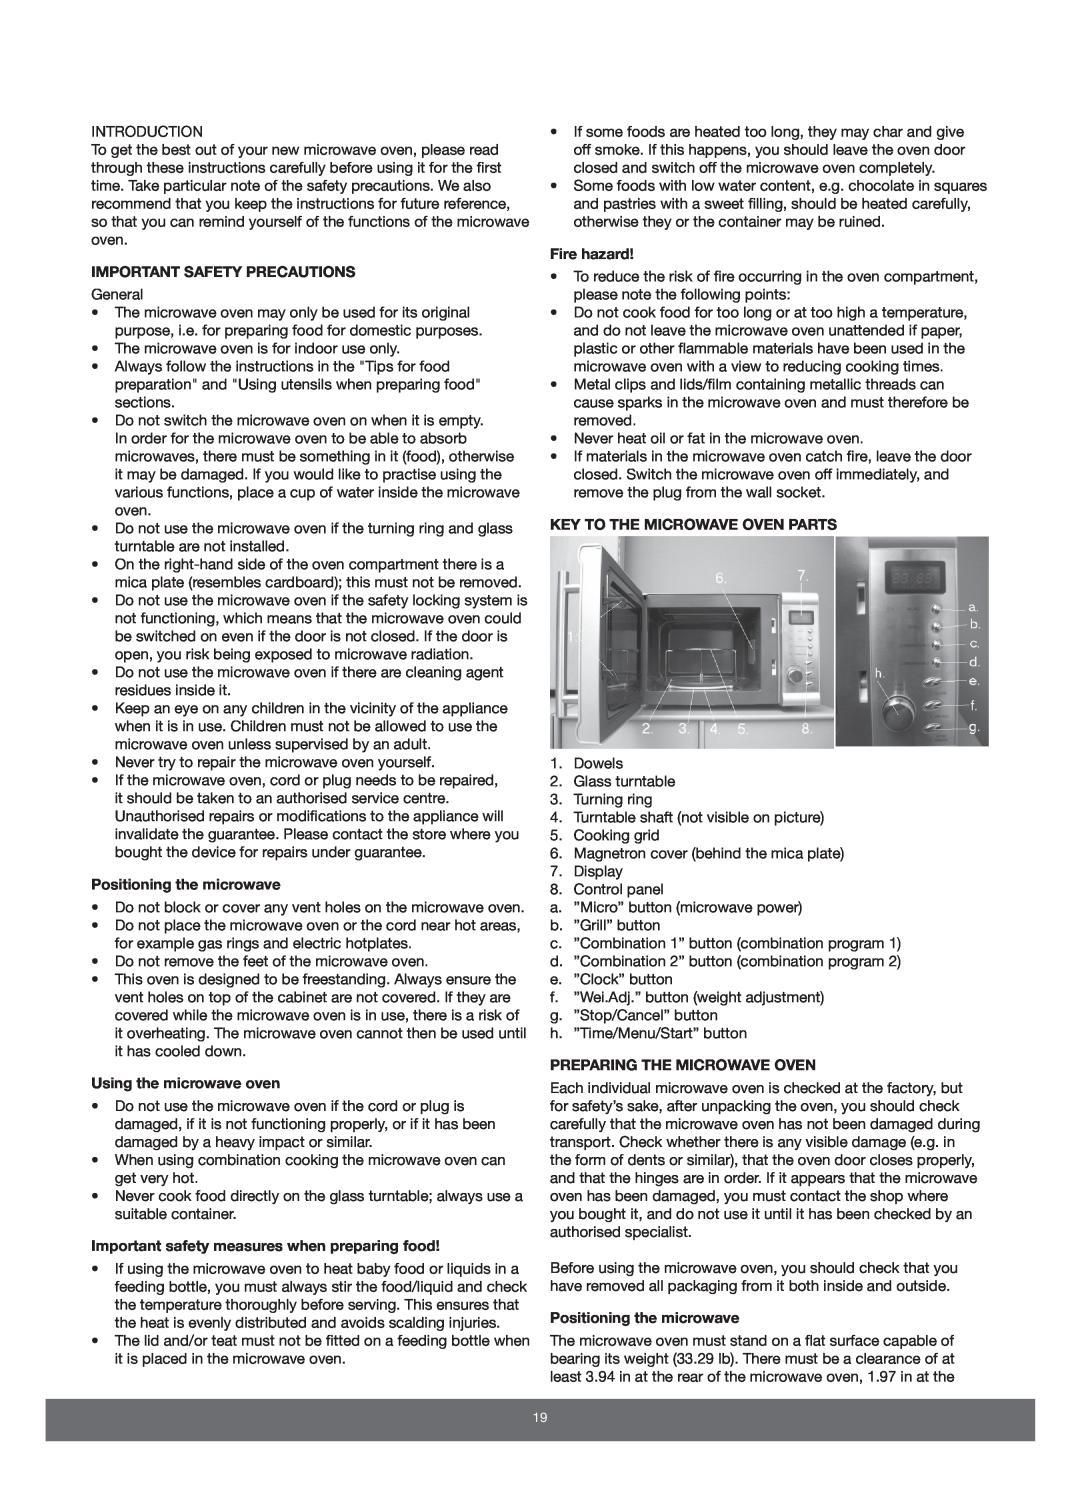 Melissa 653-089 manual Important Safety Precautions, Positioning the microwave, Using the microwave oven, Fire hazard 